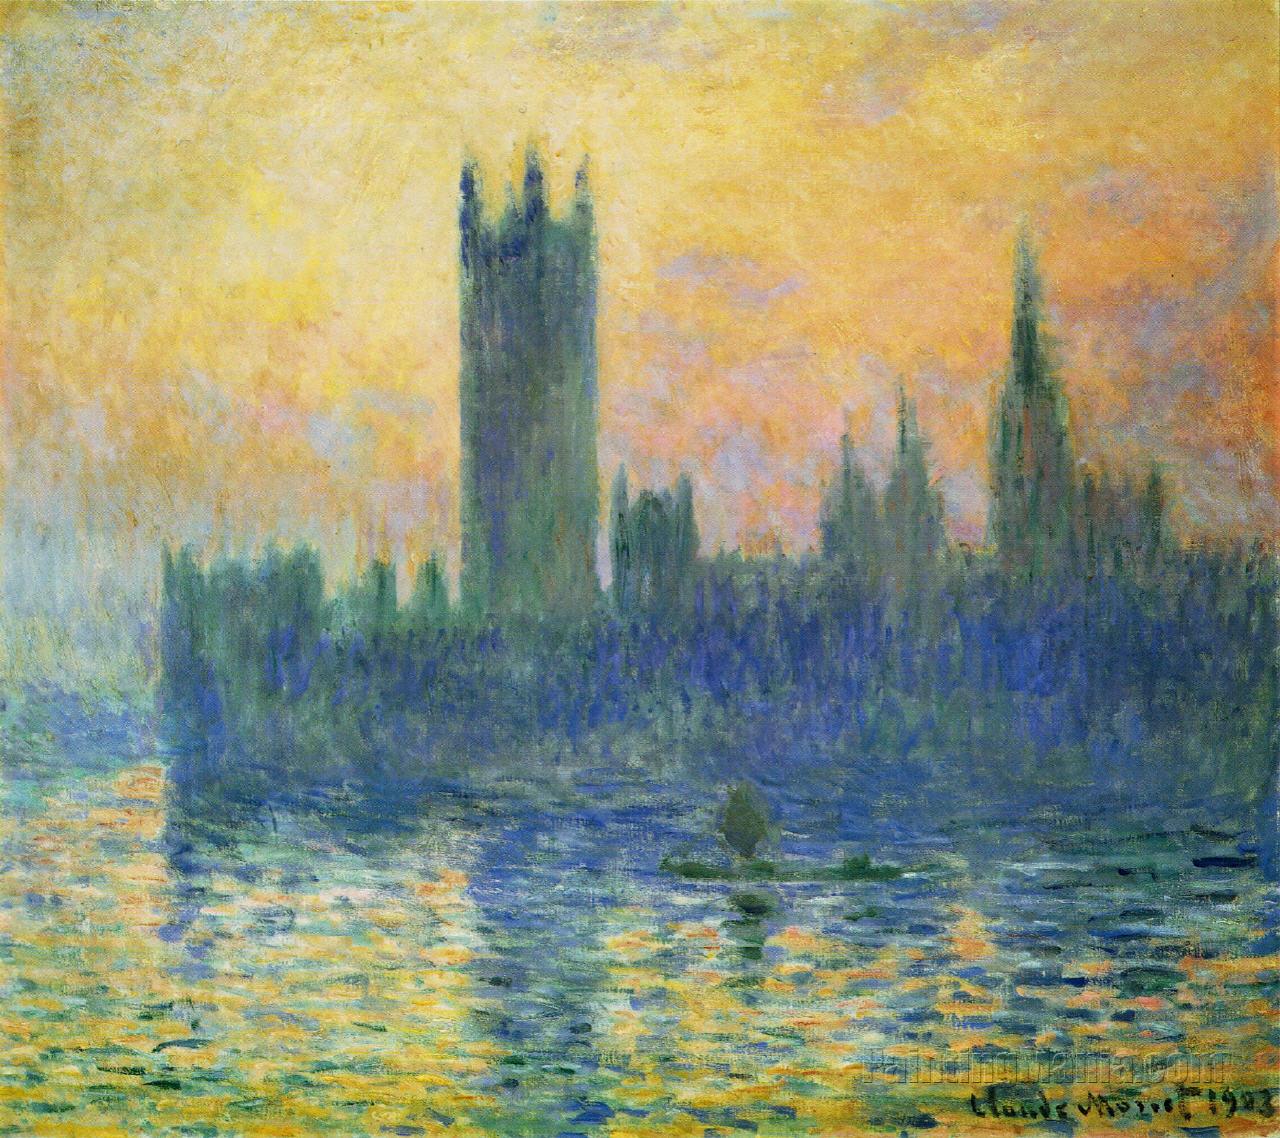 The Houses of Parliament, Sunset